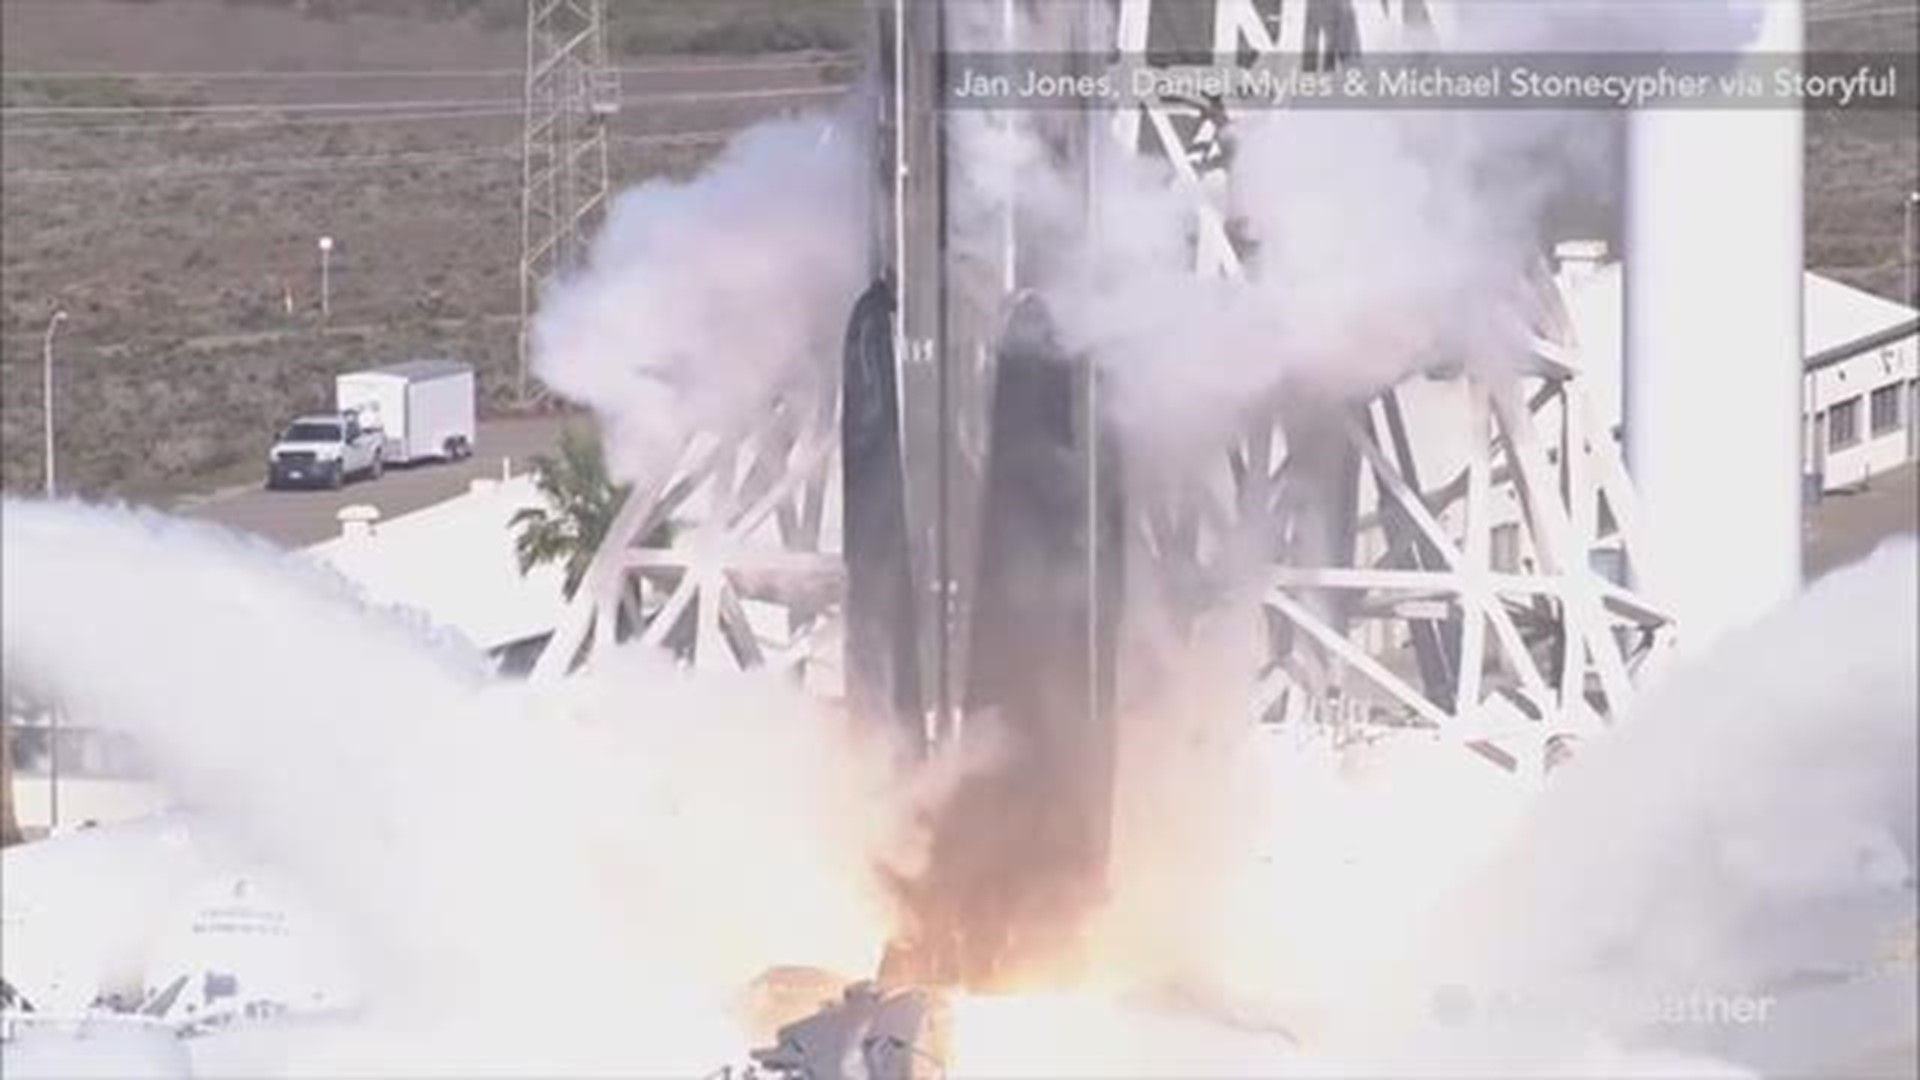 For the first time in SpaceX history, a rocket that had previously been launched twice, was able to be successfully launched for a 3rd time on December 3.